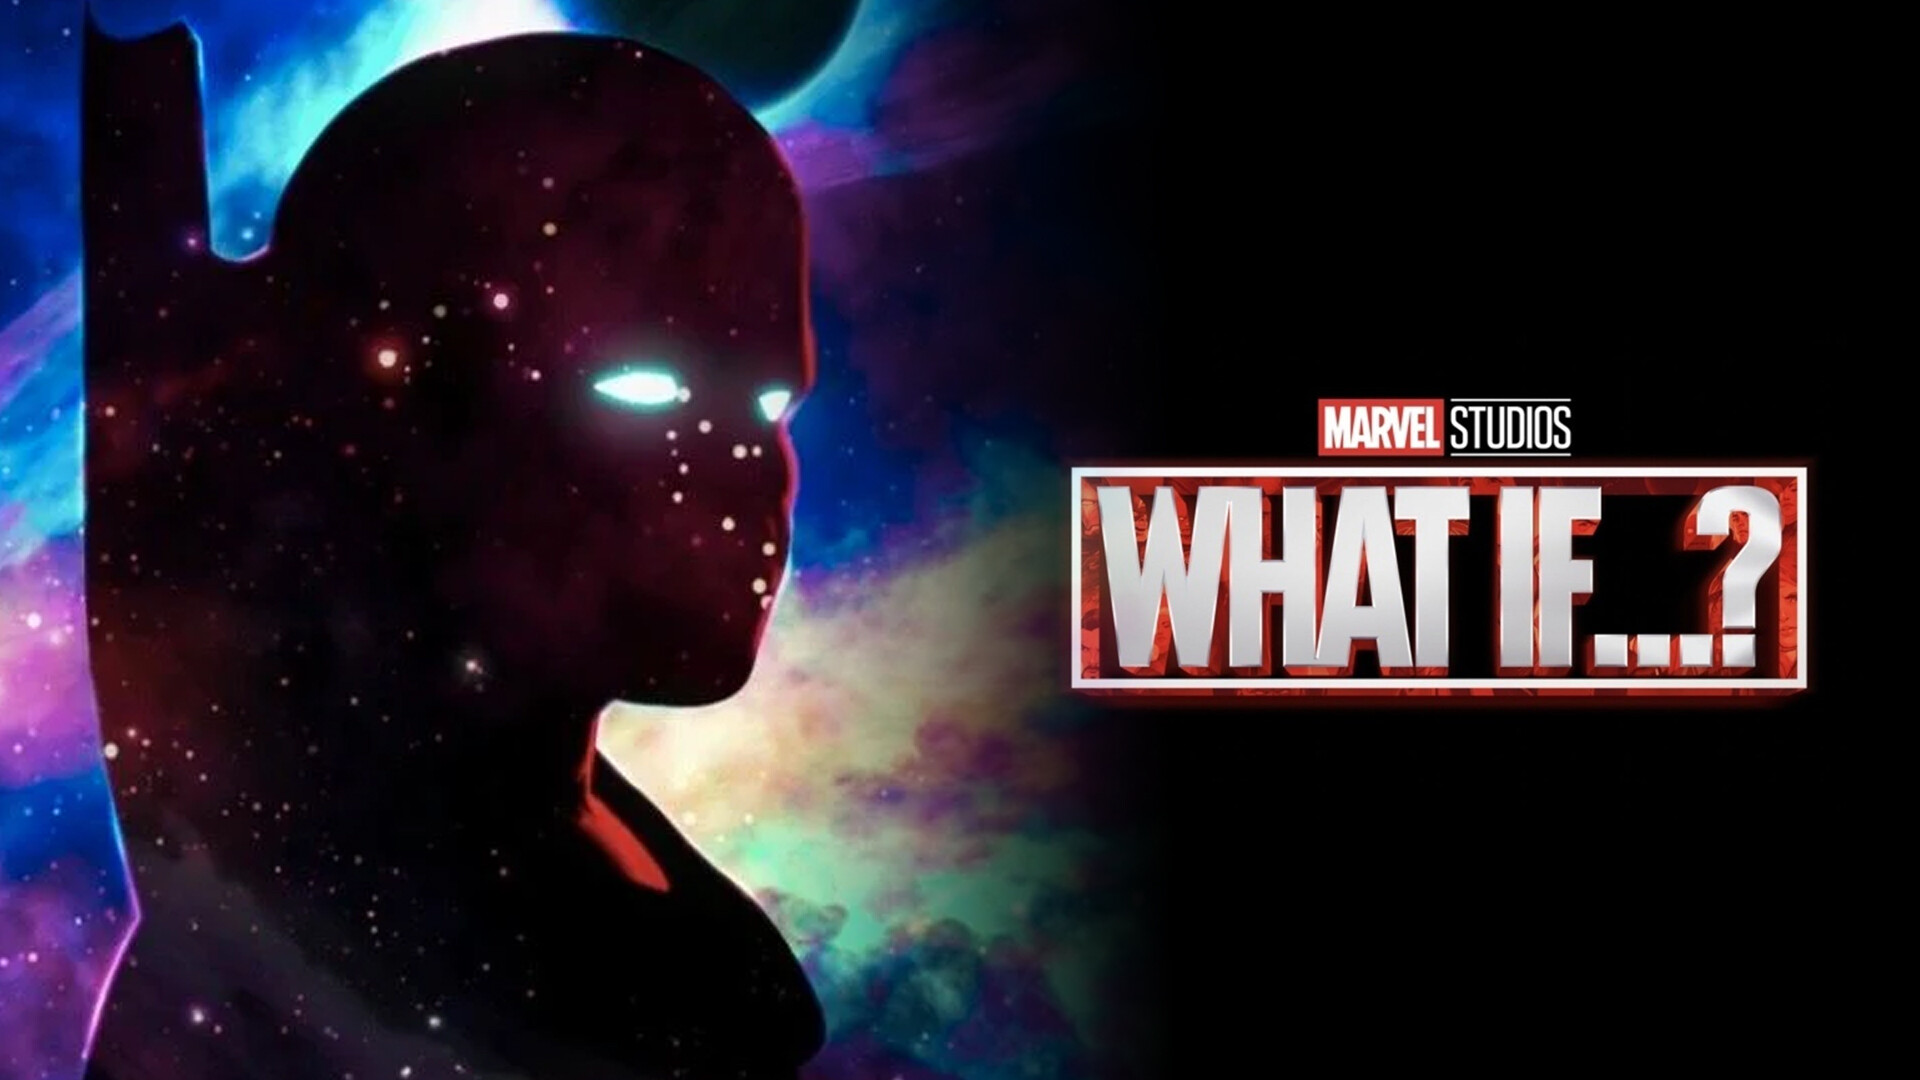 What If...?: Marvel Studios, Series based on the Marvel Comics series of the same name. 1920x1080 Full HD Background.